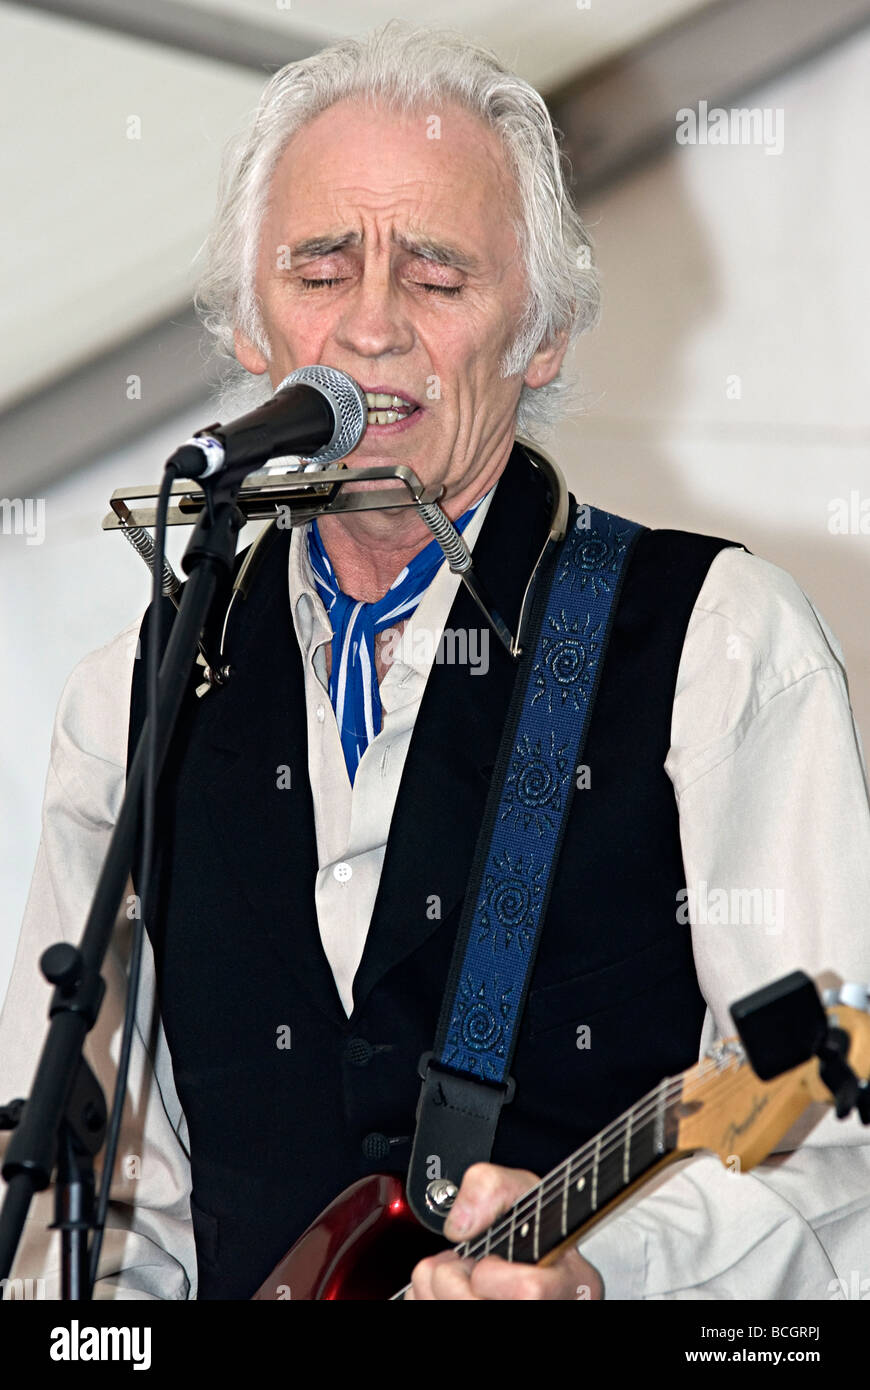 Steve gibbons the Birmingham based singer who was part of the uglys and ...